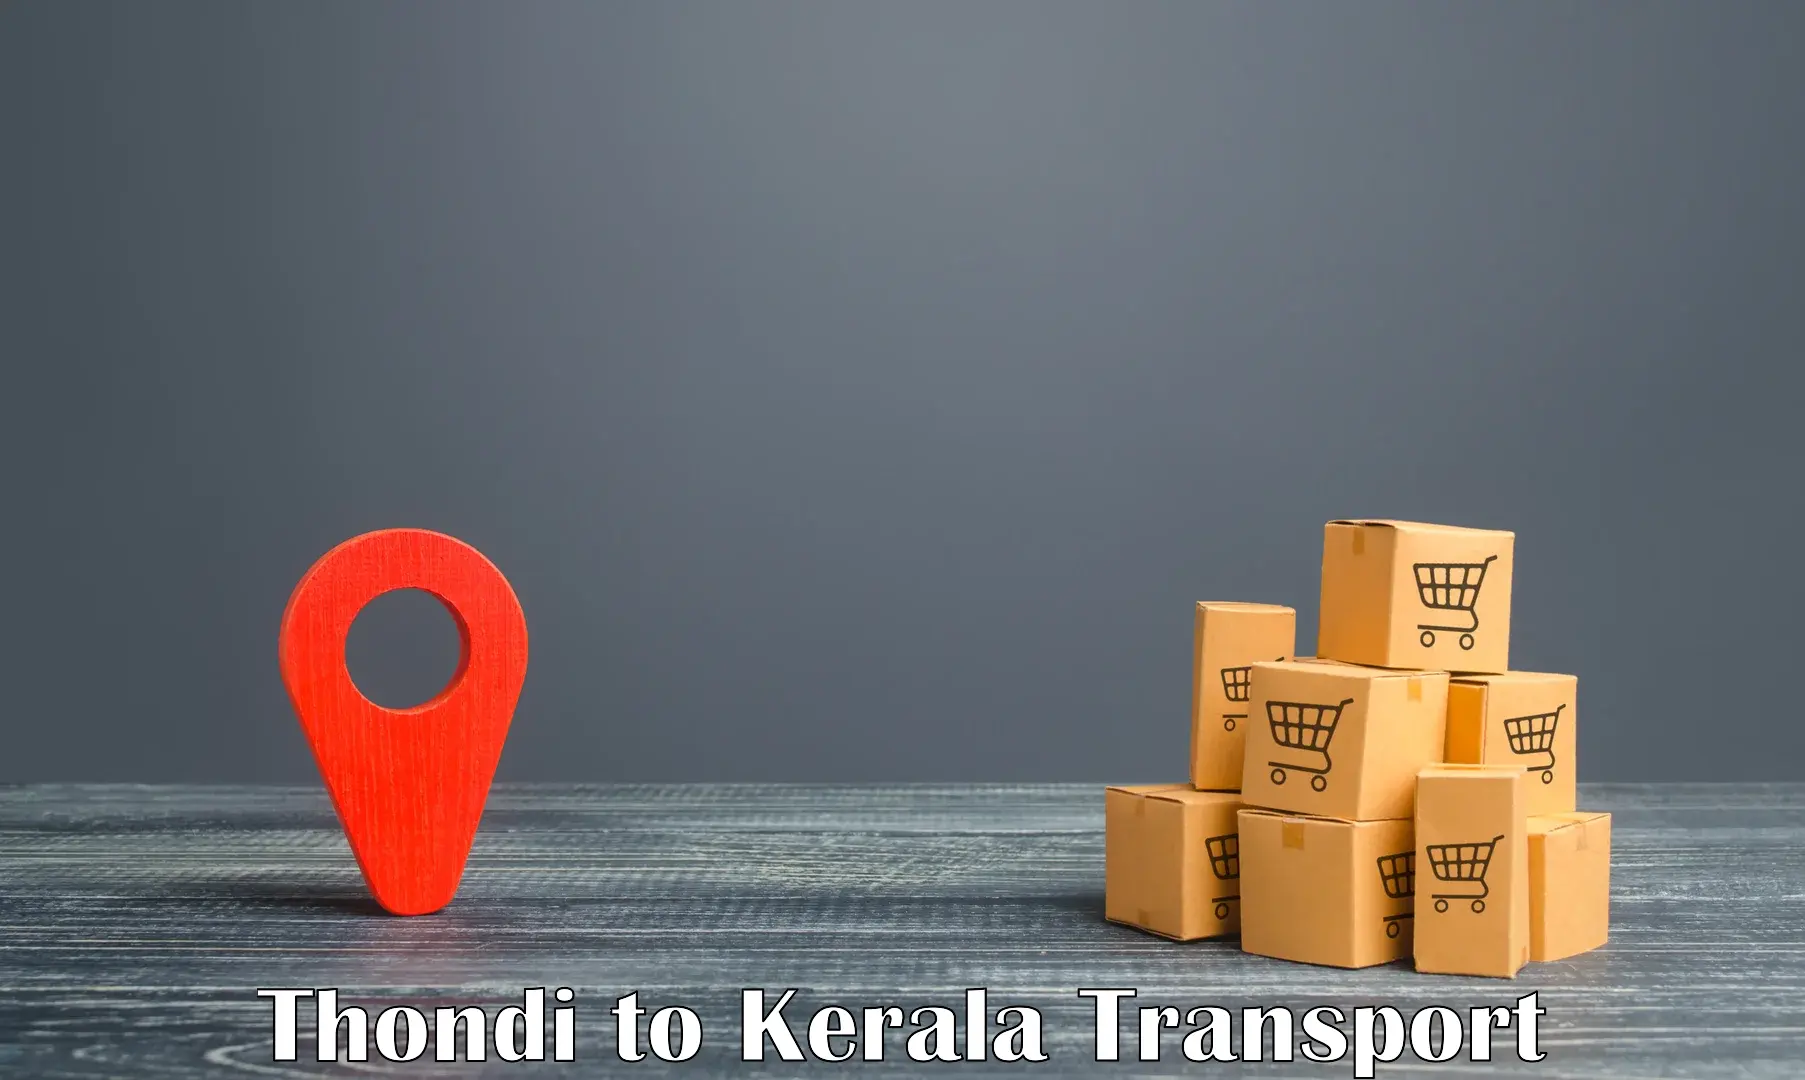 Commercial transport service Thondi to Kerala